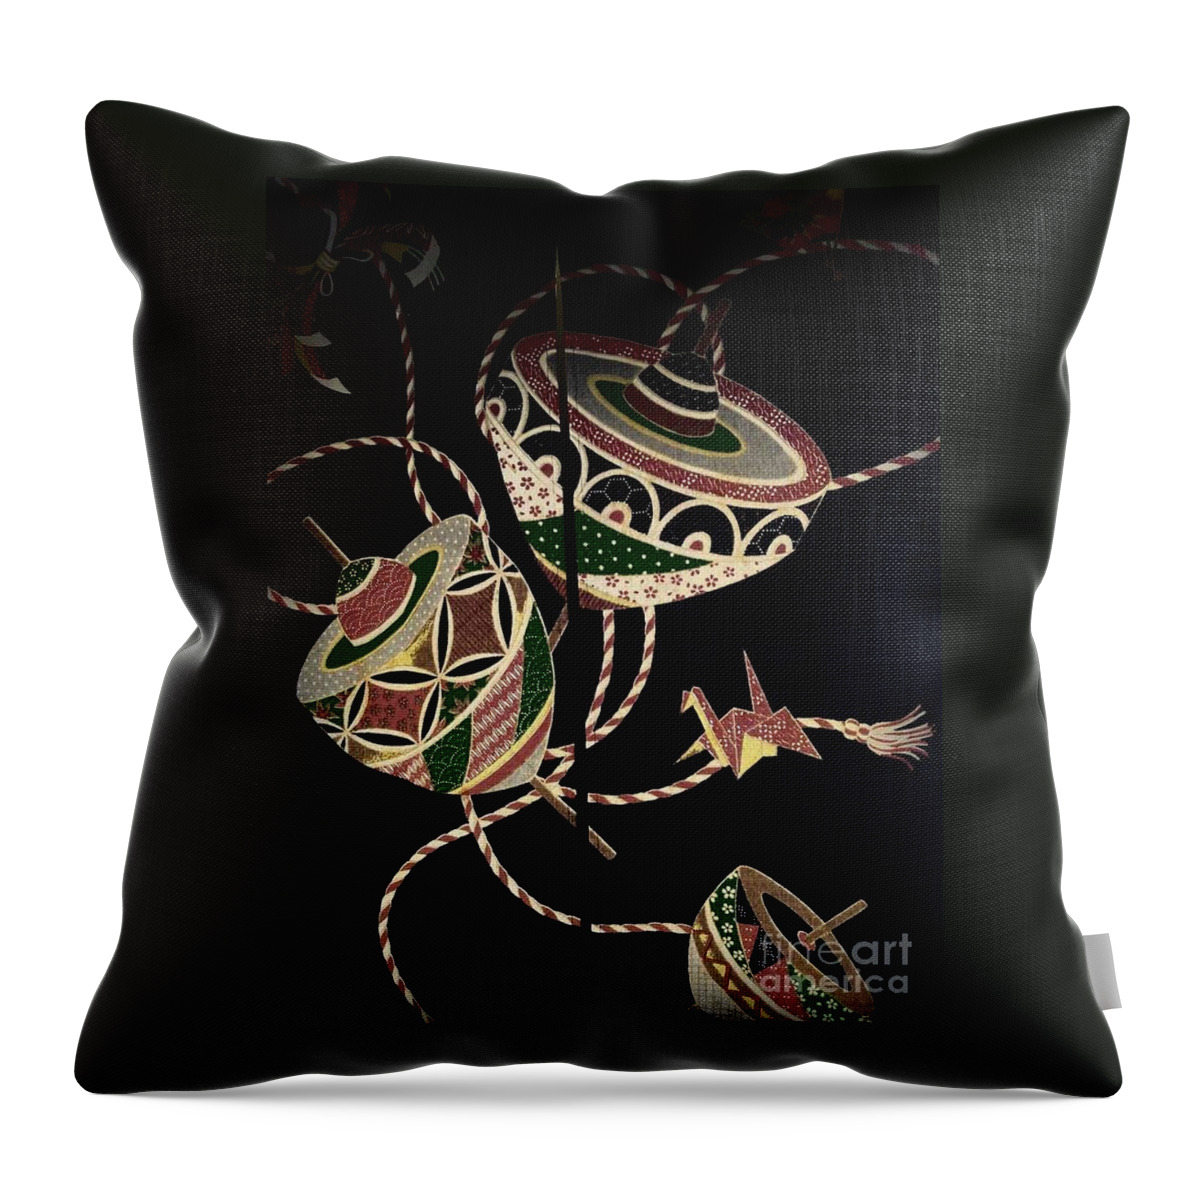 Toy Throw Pillow featuring the photograph Koma by Eena Bo